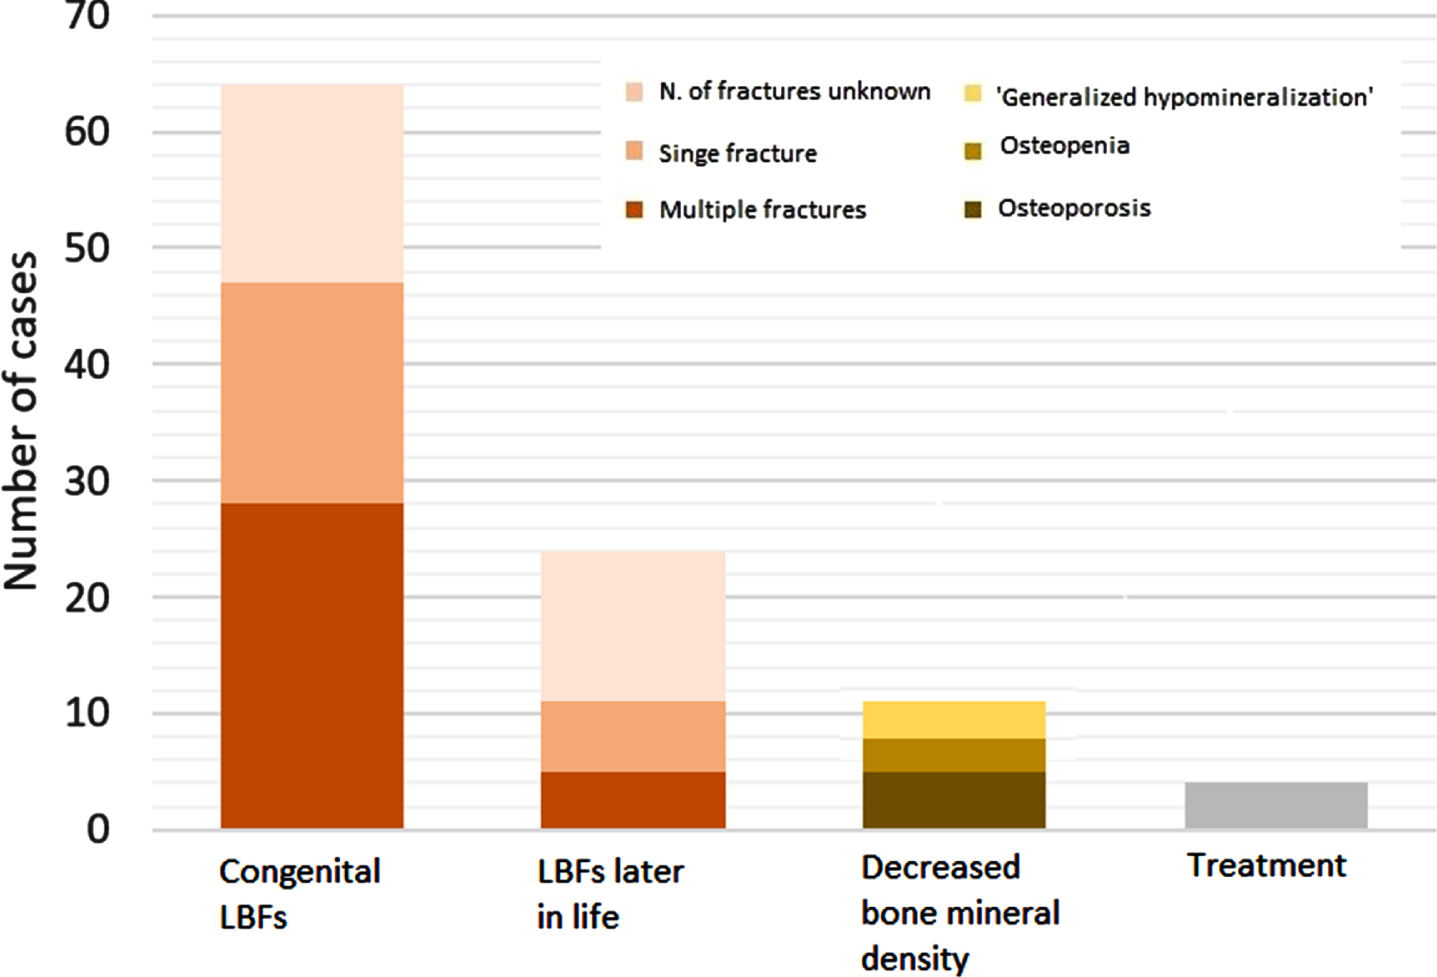 Bone complications in patients with a congenital myopathy. Number of cases identified with congenital LBFs, LBFs later in life, decreased bone mineral density or treatment. Treatment includes vitamin D and/or calcium supplementation or intravenous diphosphonate administration. N = number; LBF = long bone fracture.